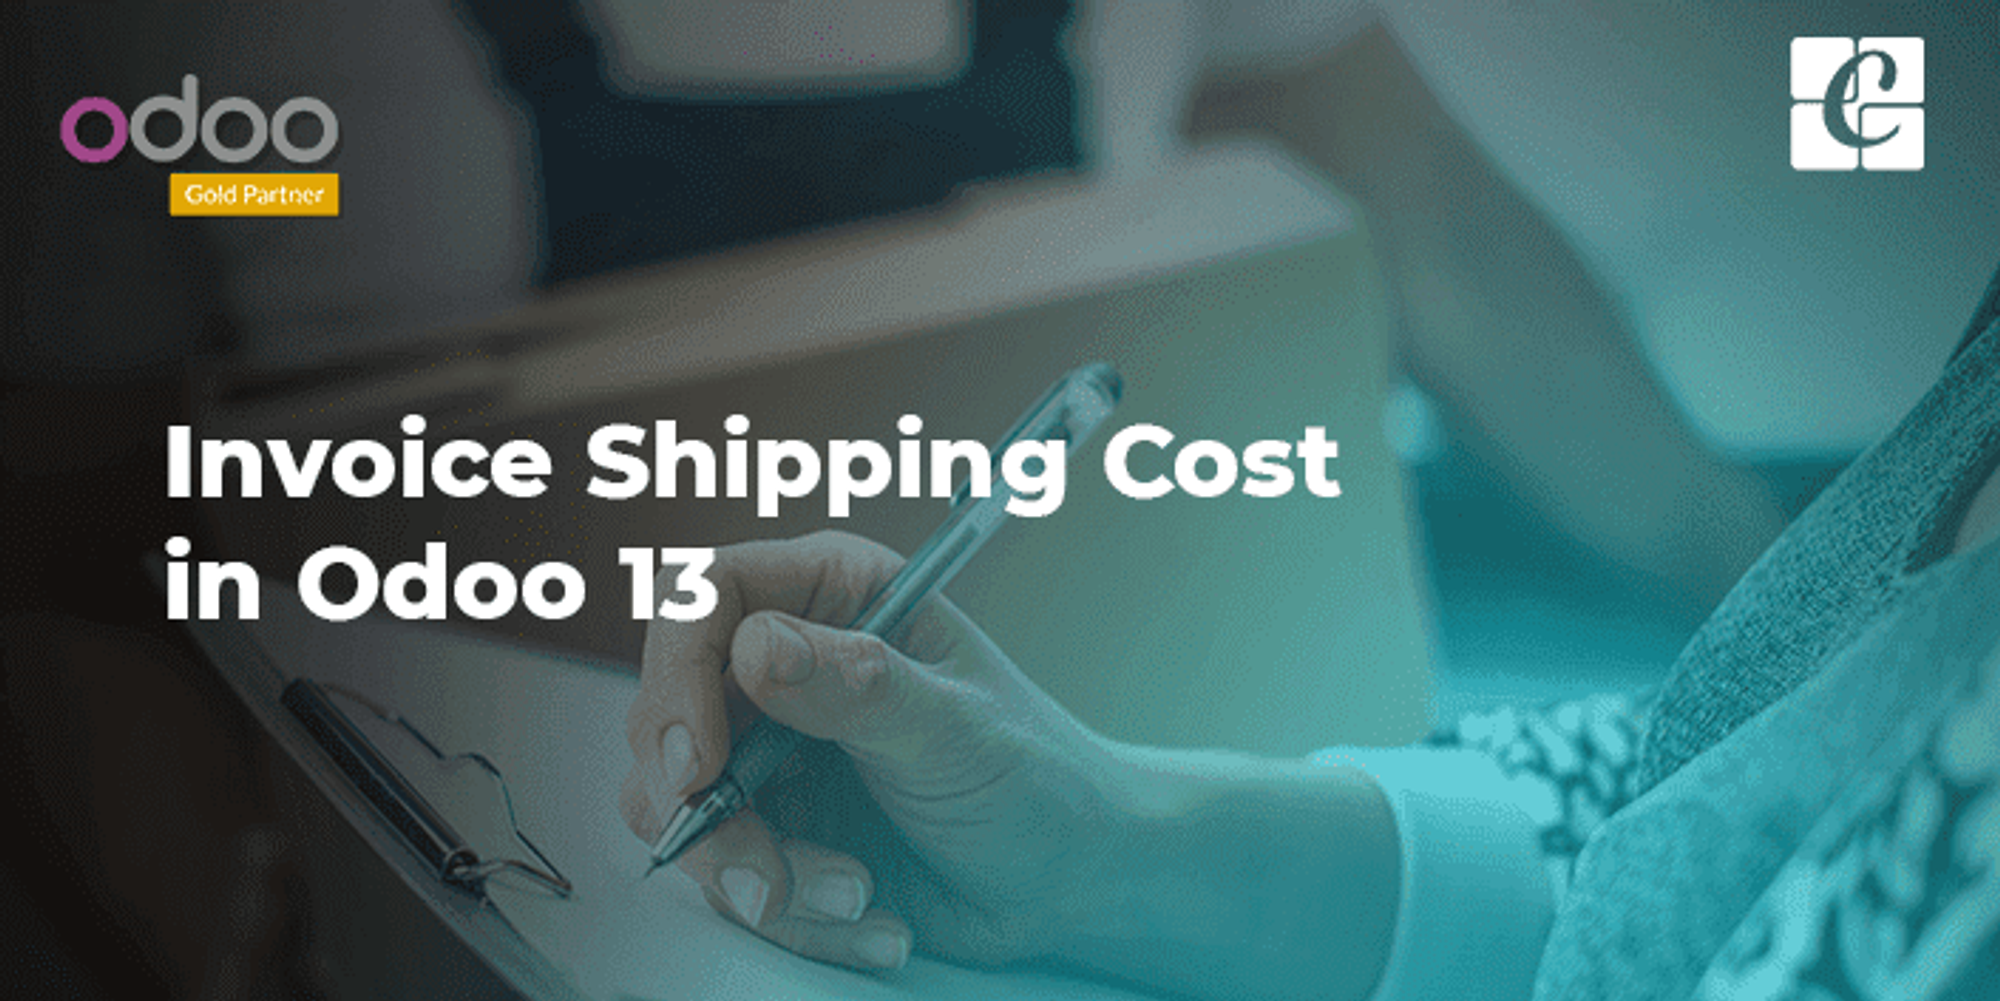 Invoice Shipping Cost in Odoo 13